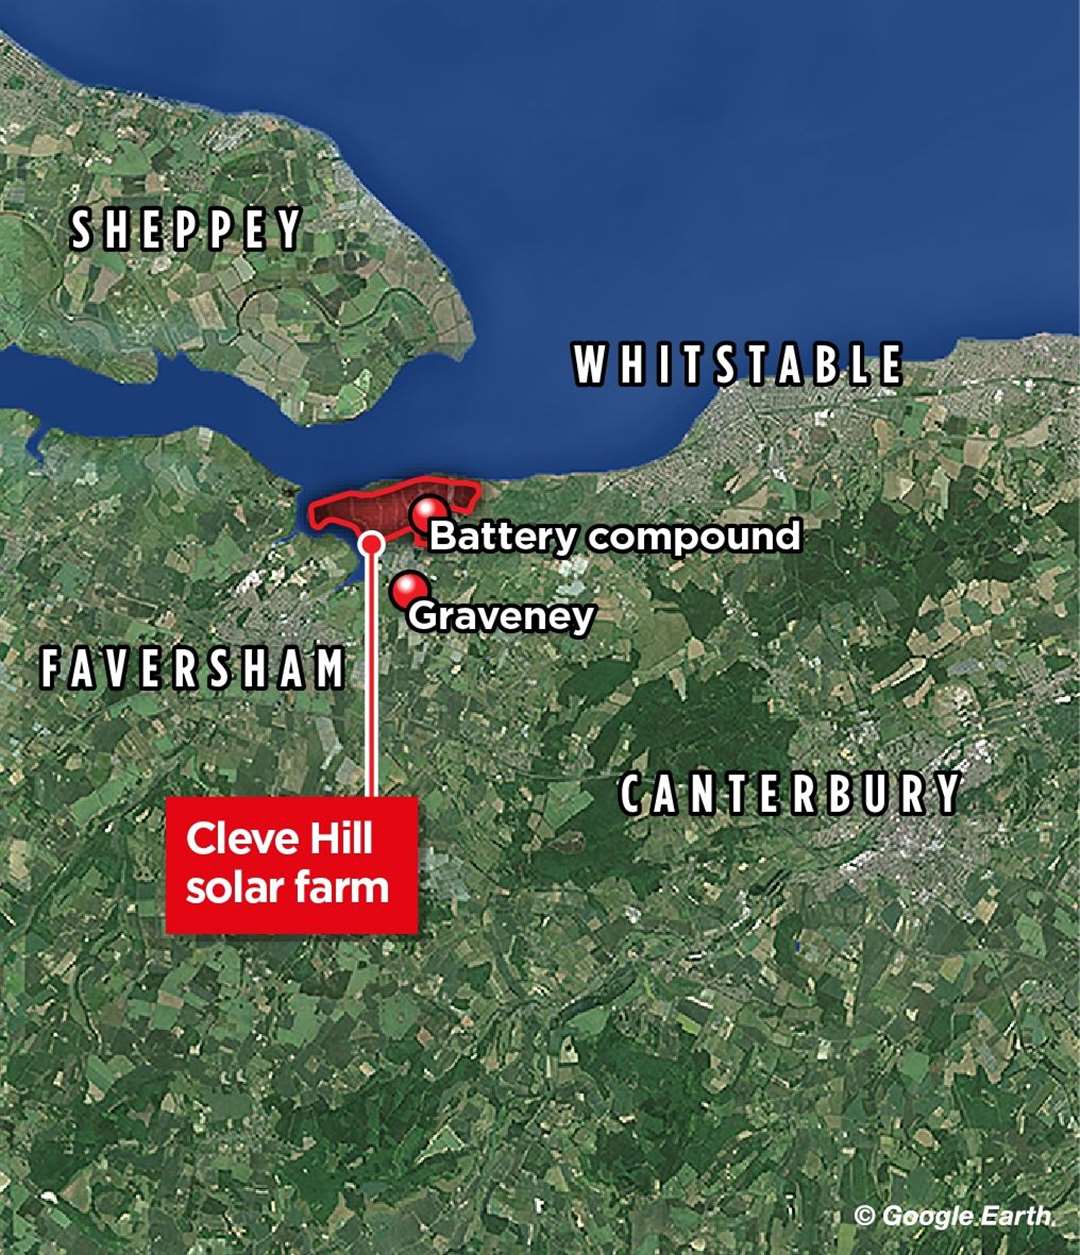 The giant solar farm will be located near Graveney, between Faversham and Whitstable